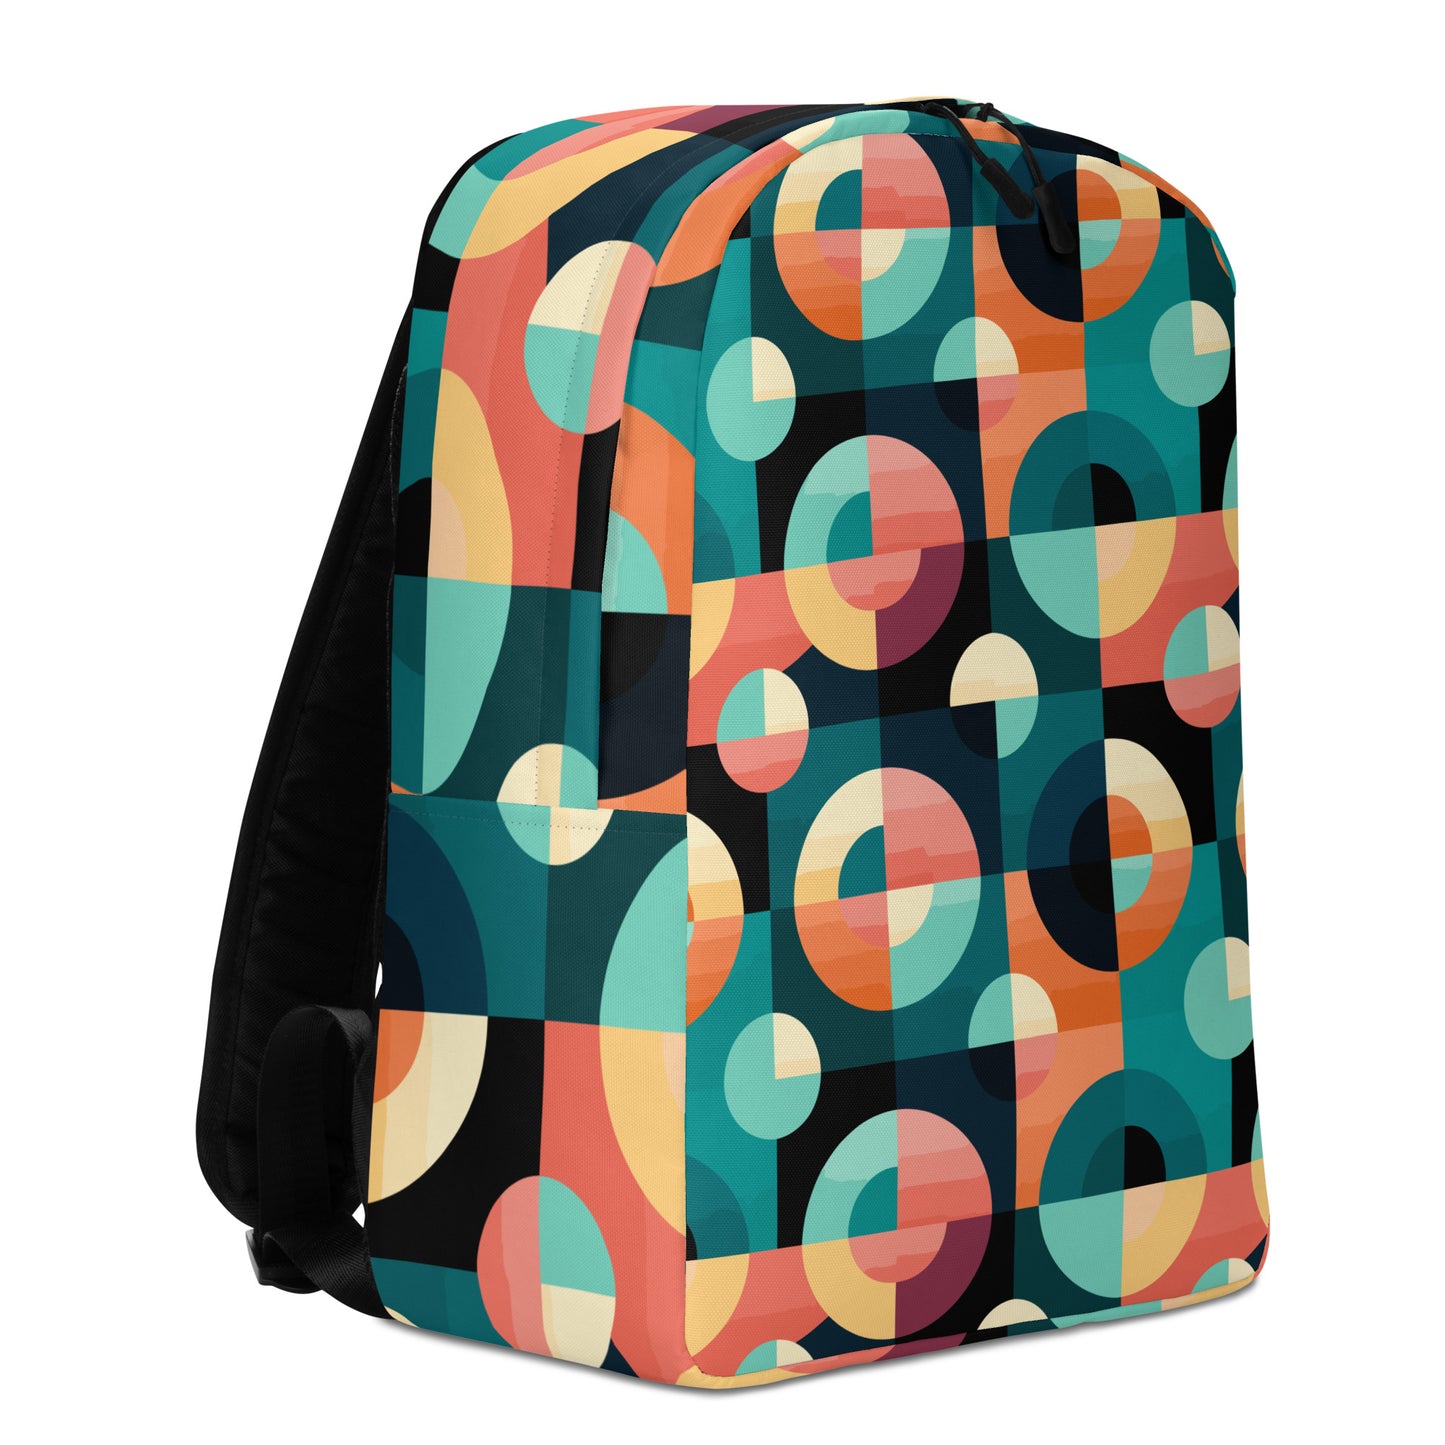 Rounders backpack